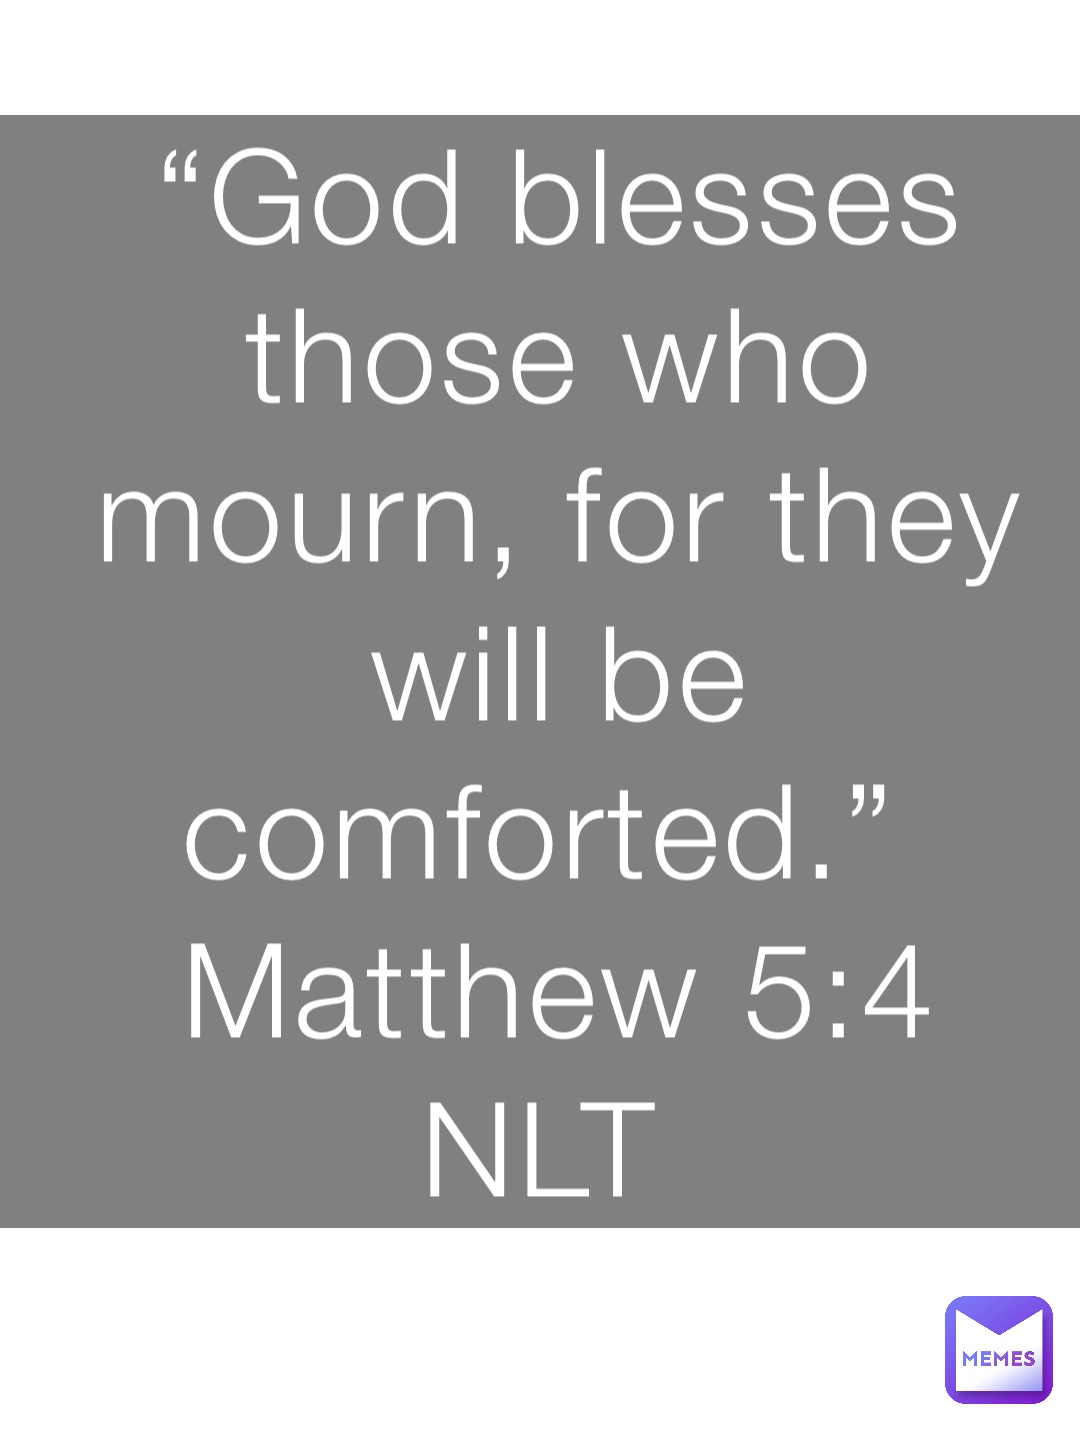 “God blesses those who mourn, for they will be comforted.”
‭‭Matthew‬ ‭5:4‬ ‭NLT‬‬